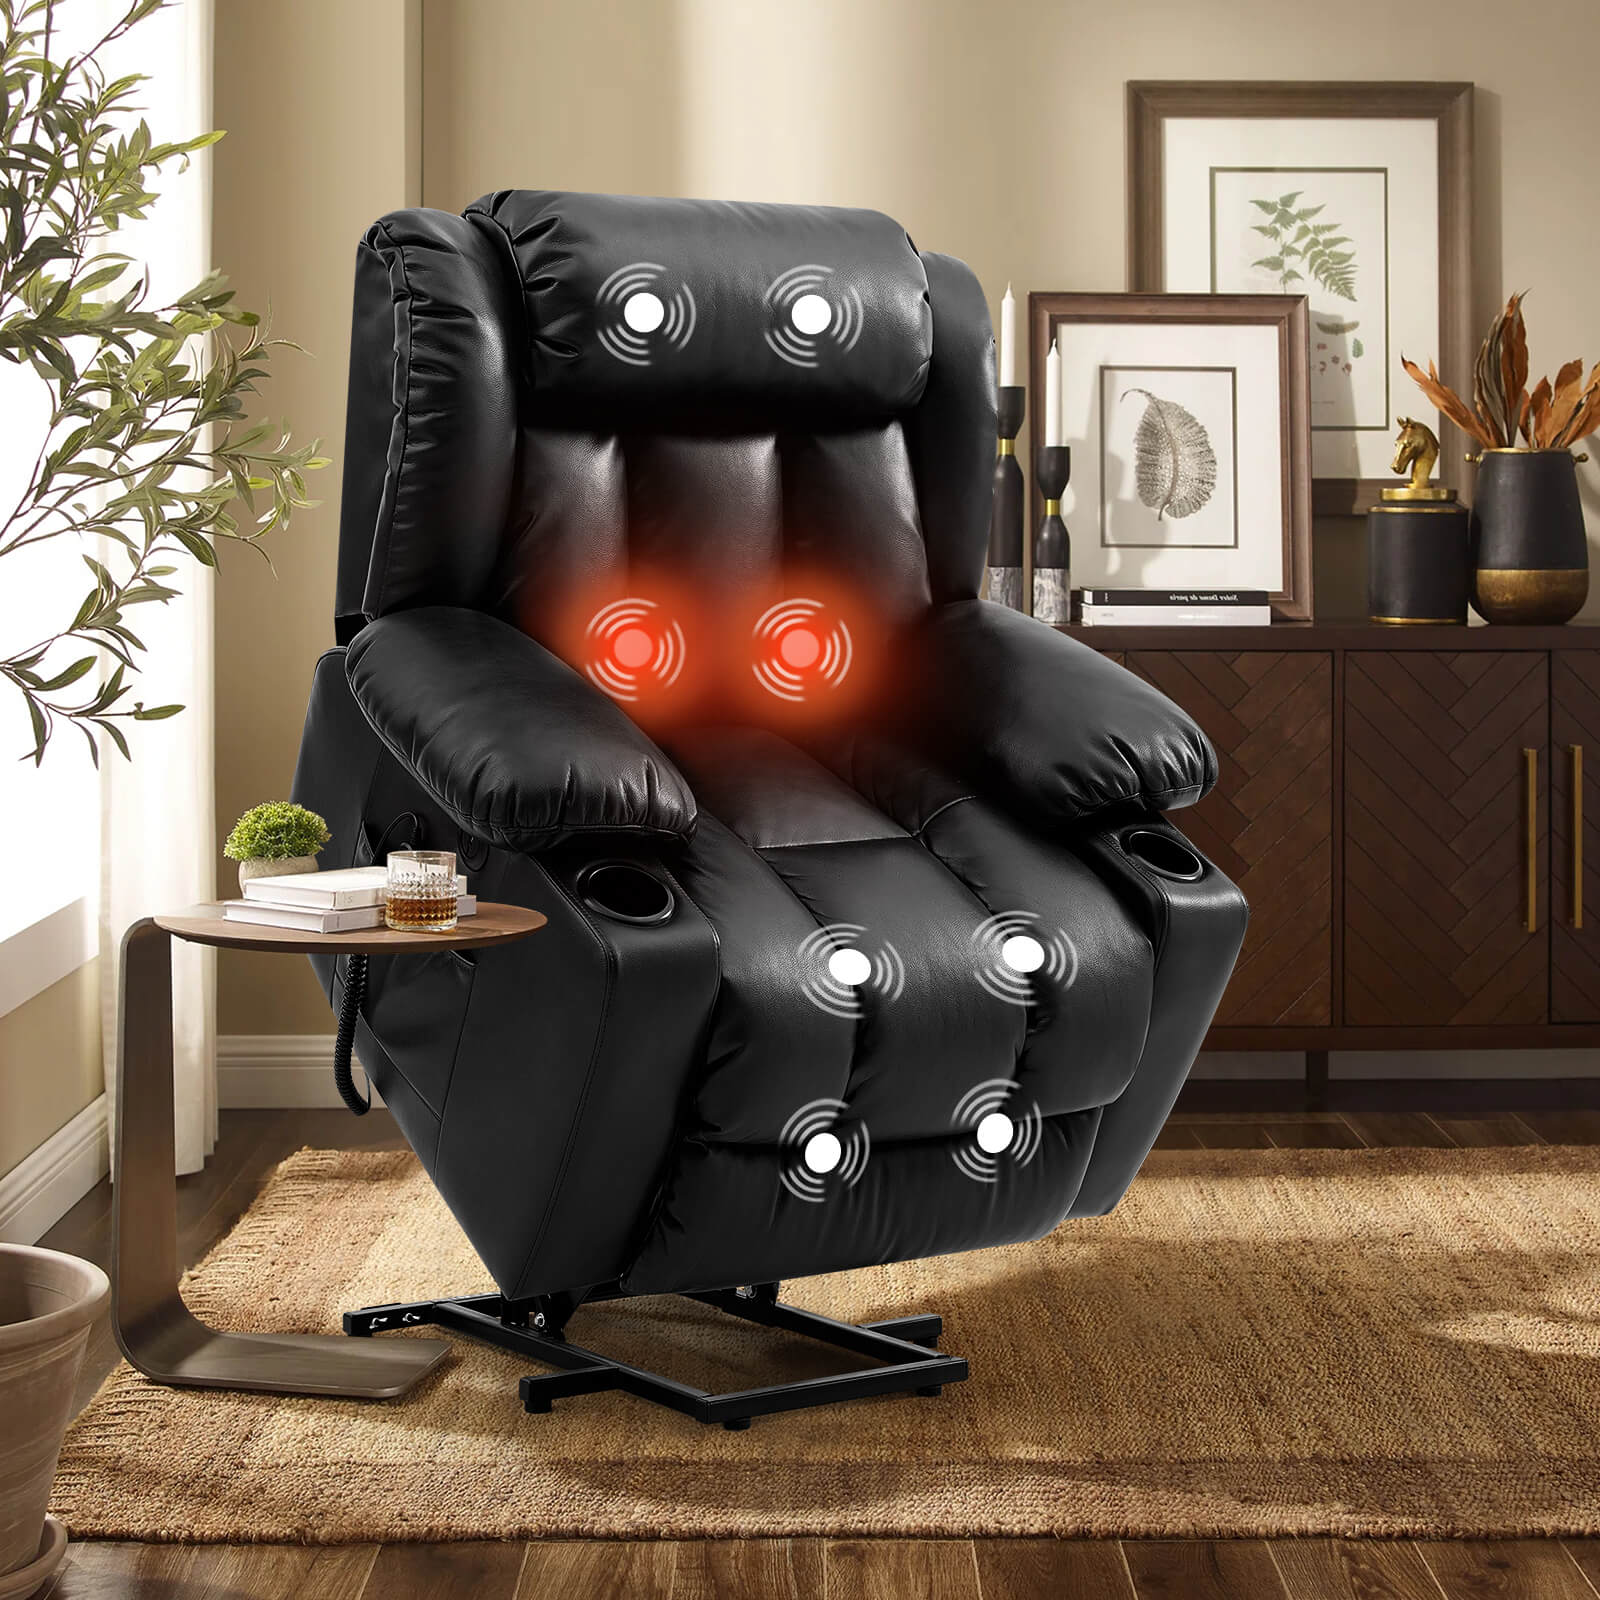 Soulout Black Luxury Lift Chair Recliner with Heat and Massage Point